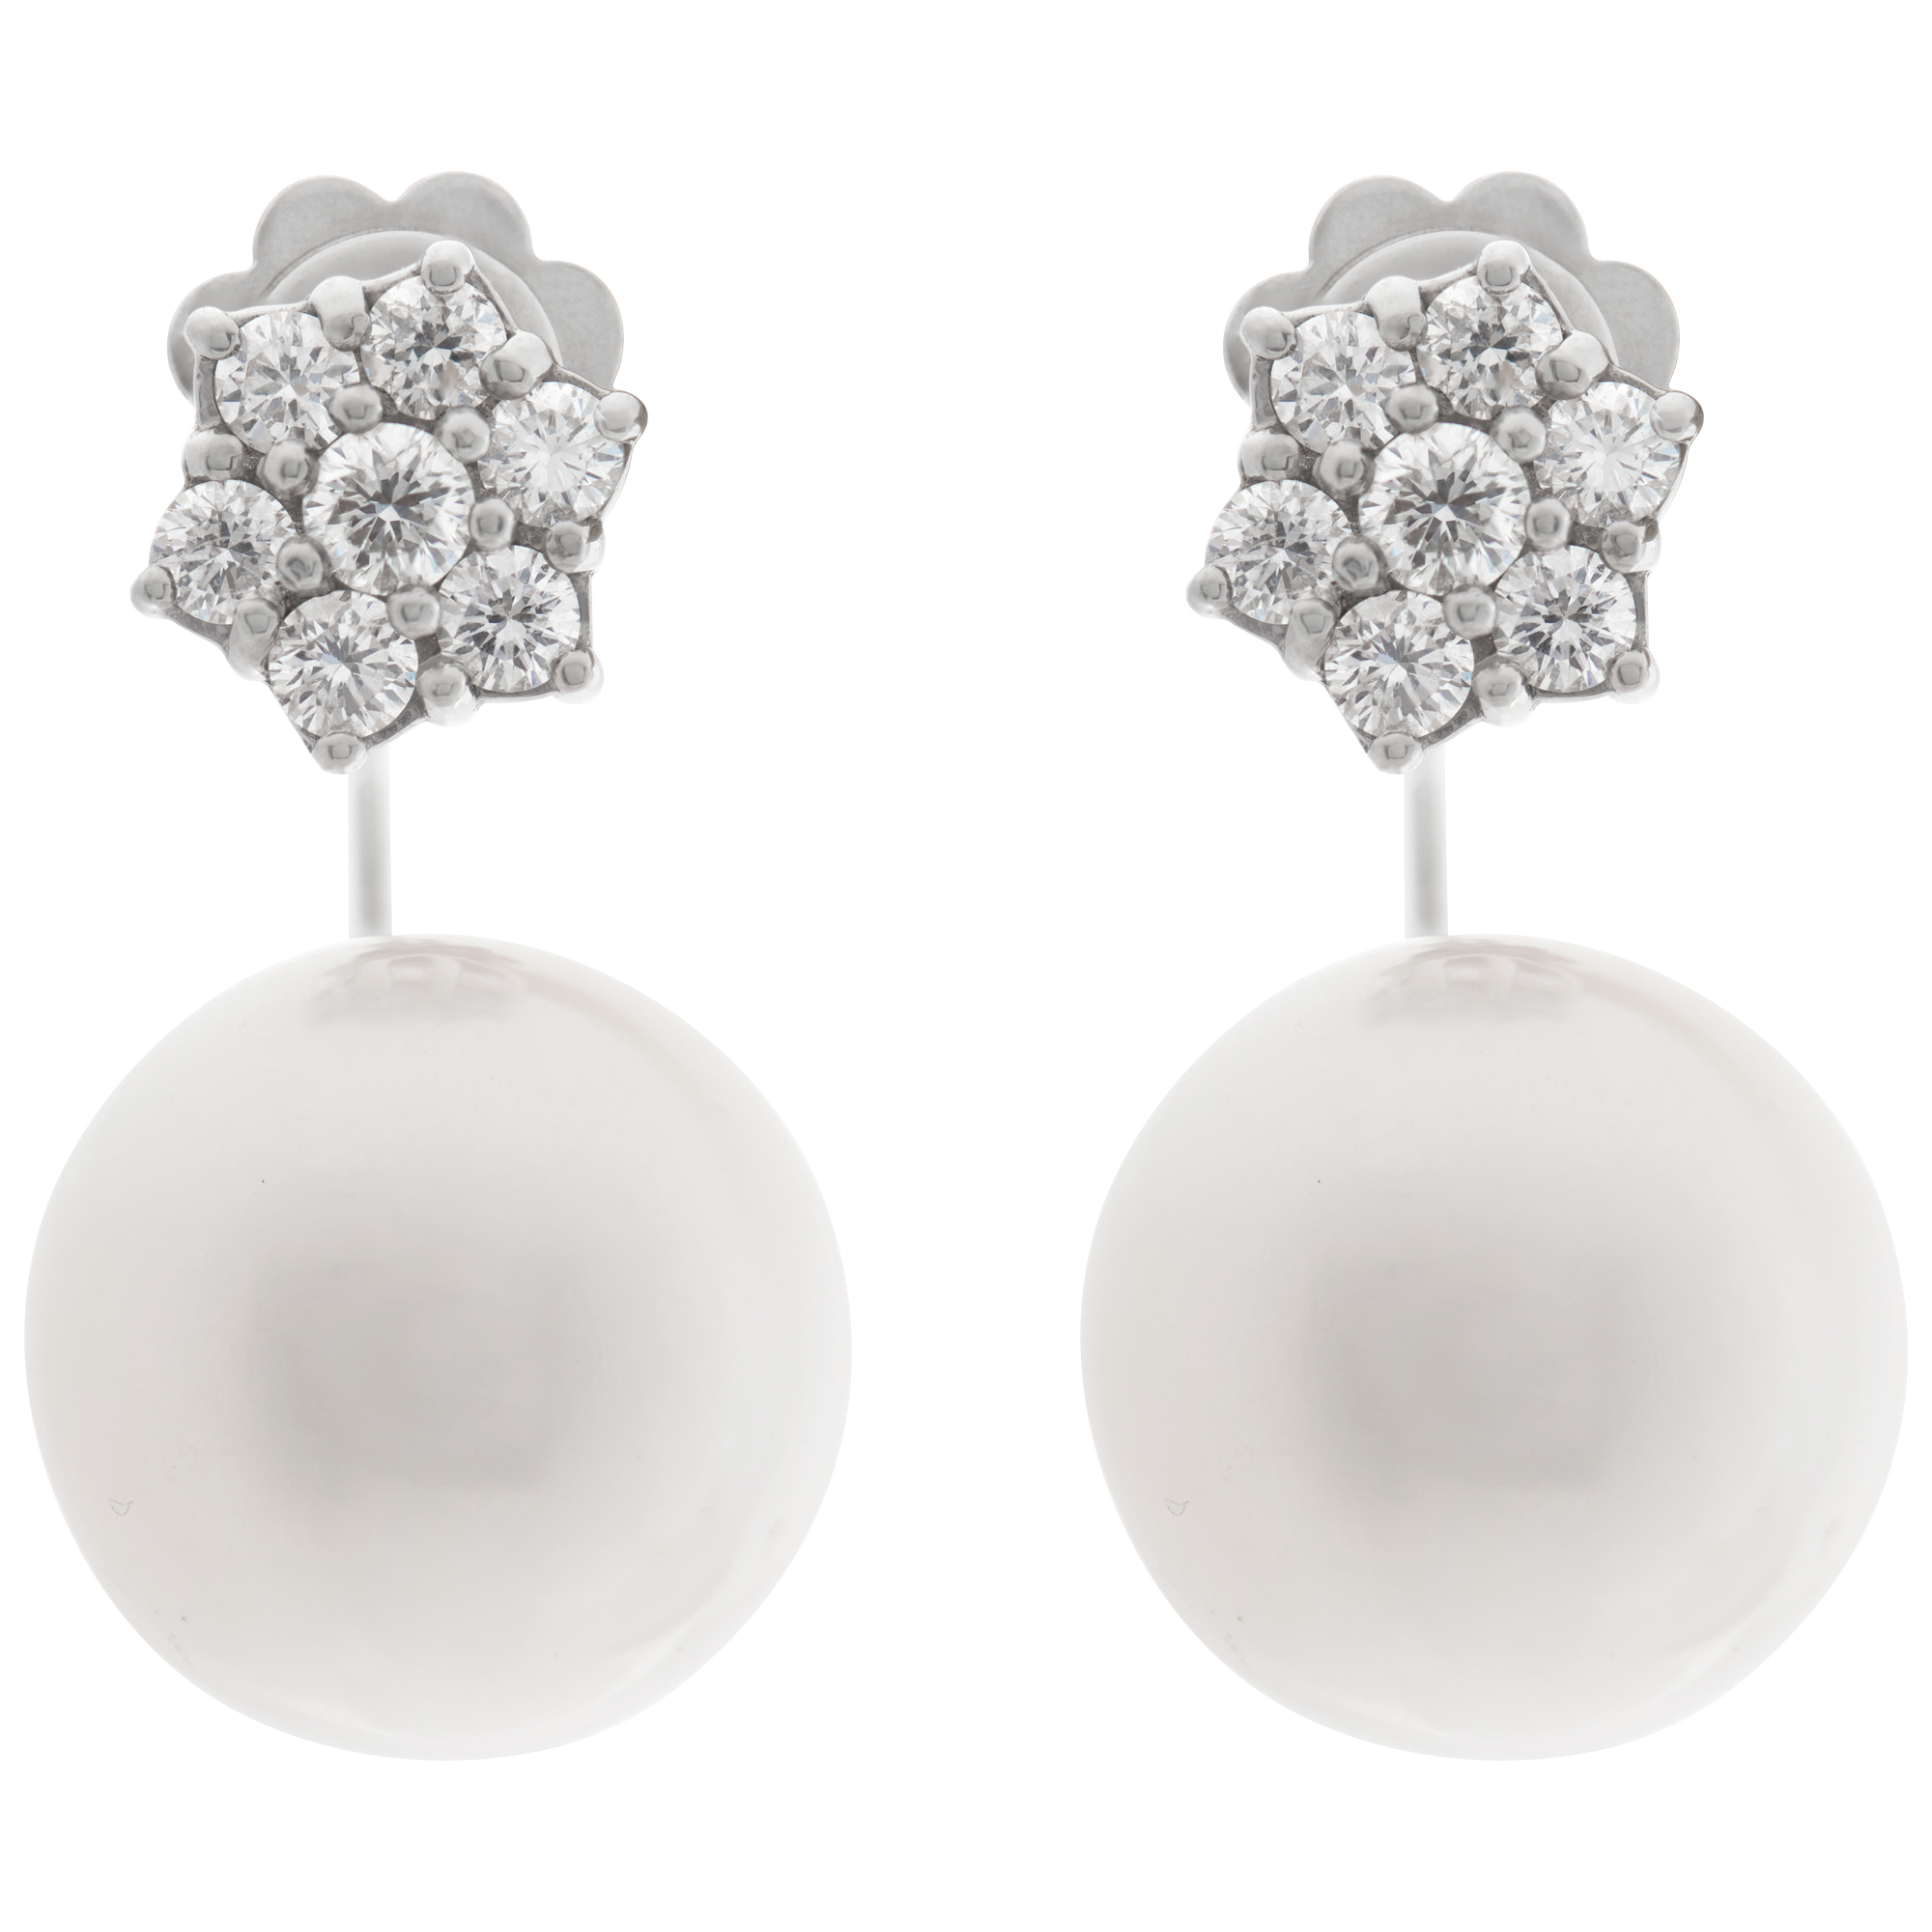 Pearl in and out earrings with diamonds in 18K white gold. 0.46 carats